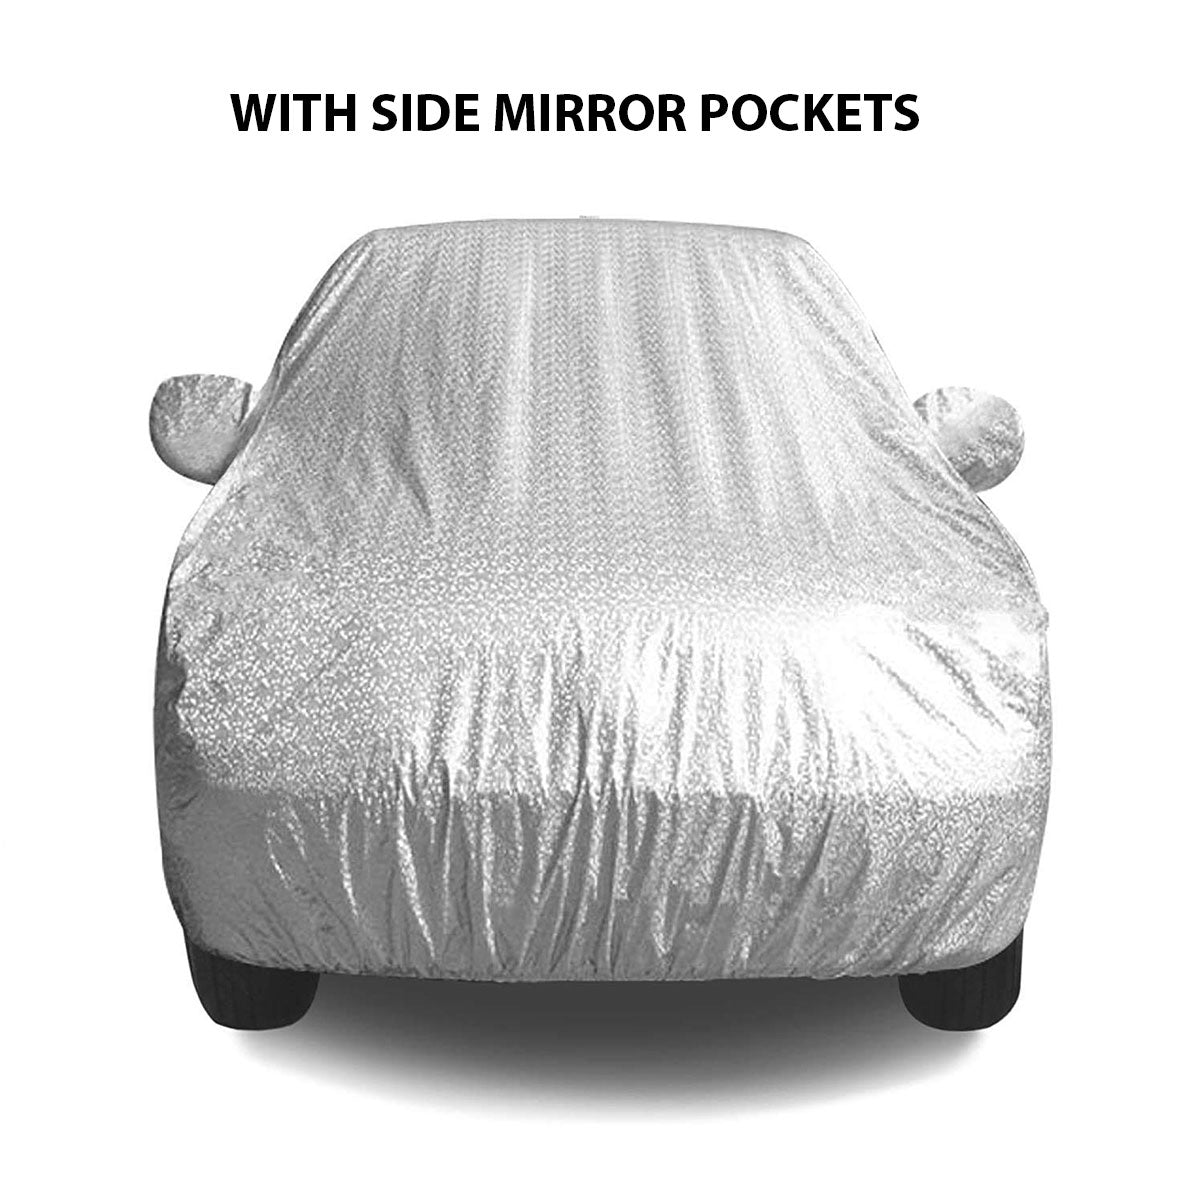 Oshotto Spyro Silver Anti Reflective, dustproof and Water Proof Car Body Cover with Mirror Pockets For Toyota Camry